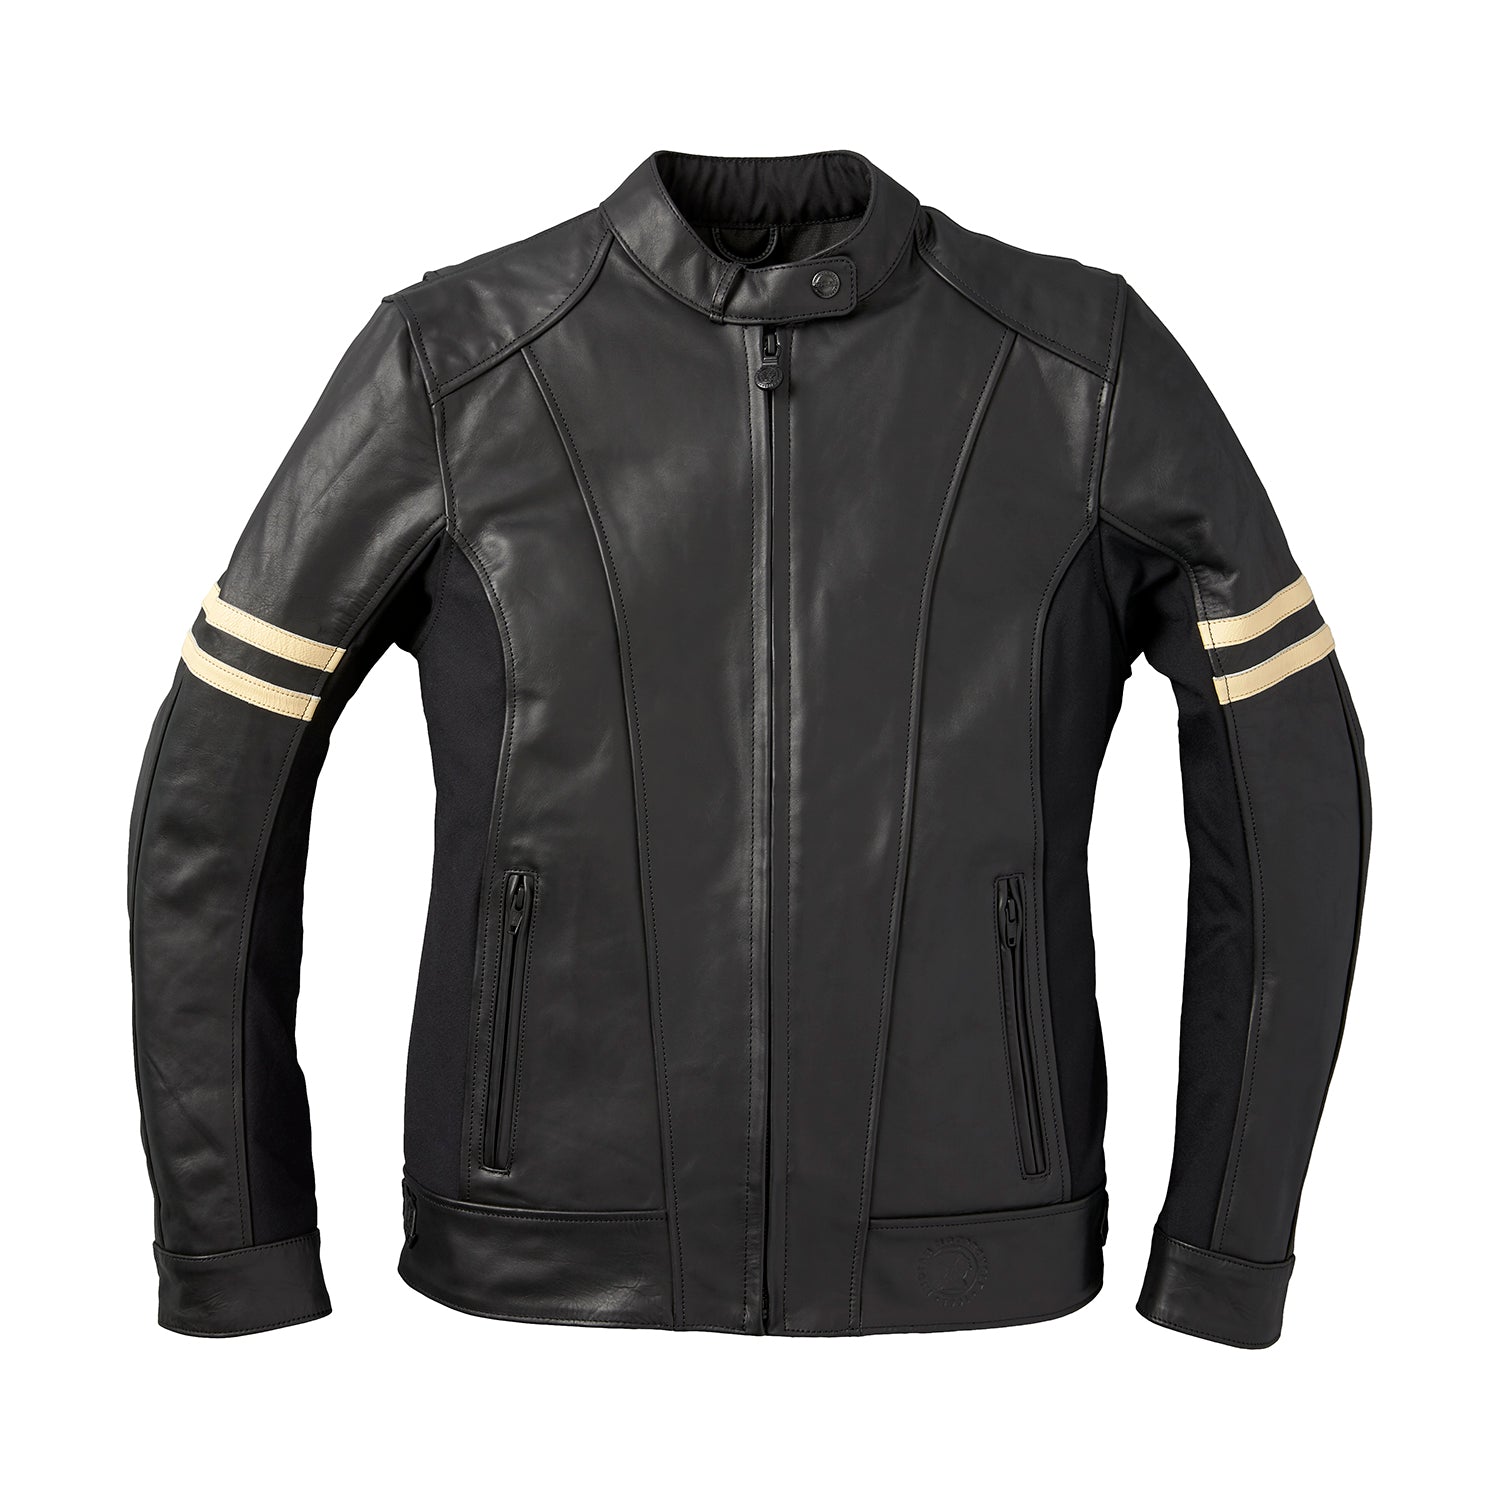 Women's Blake Leather Riding Jacket with Removable Liner, Black